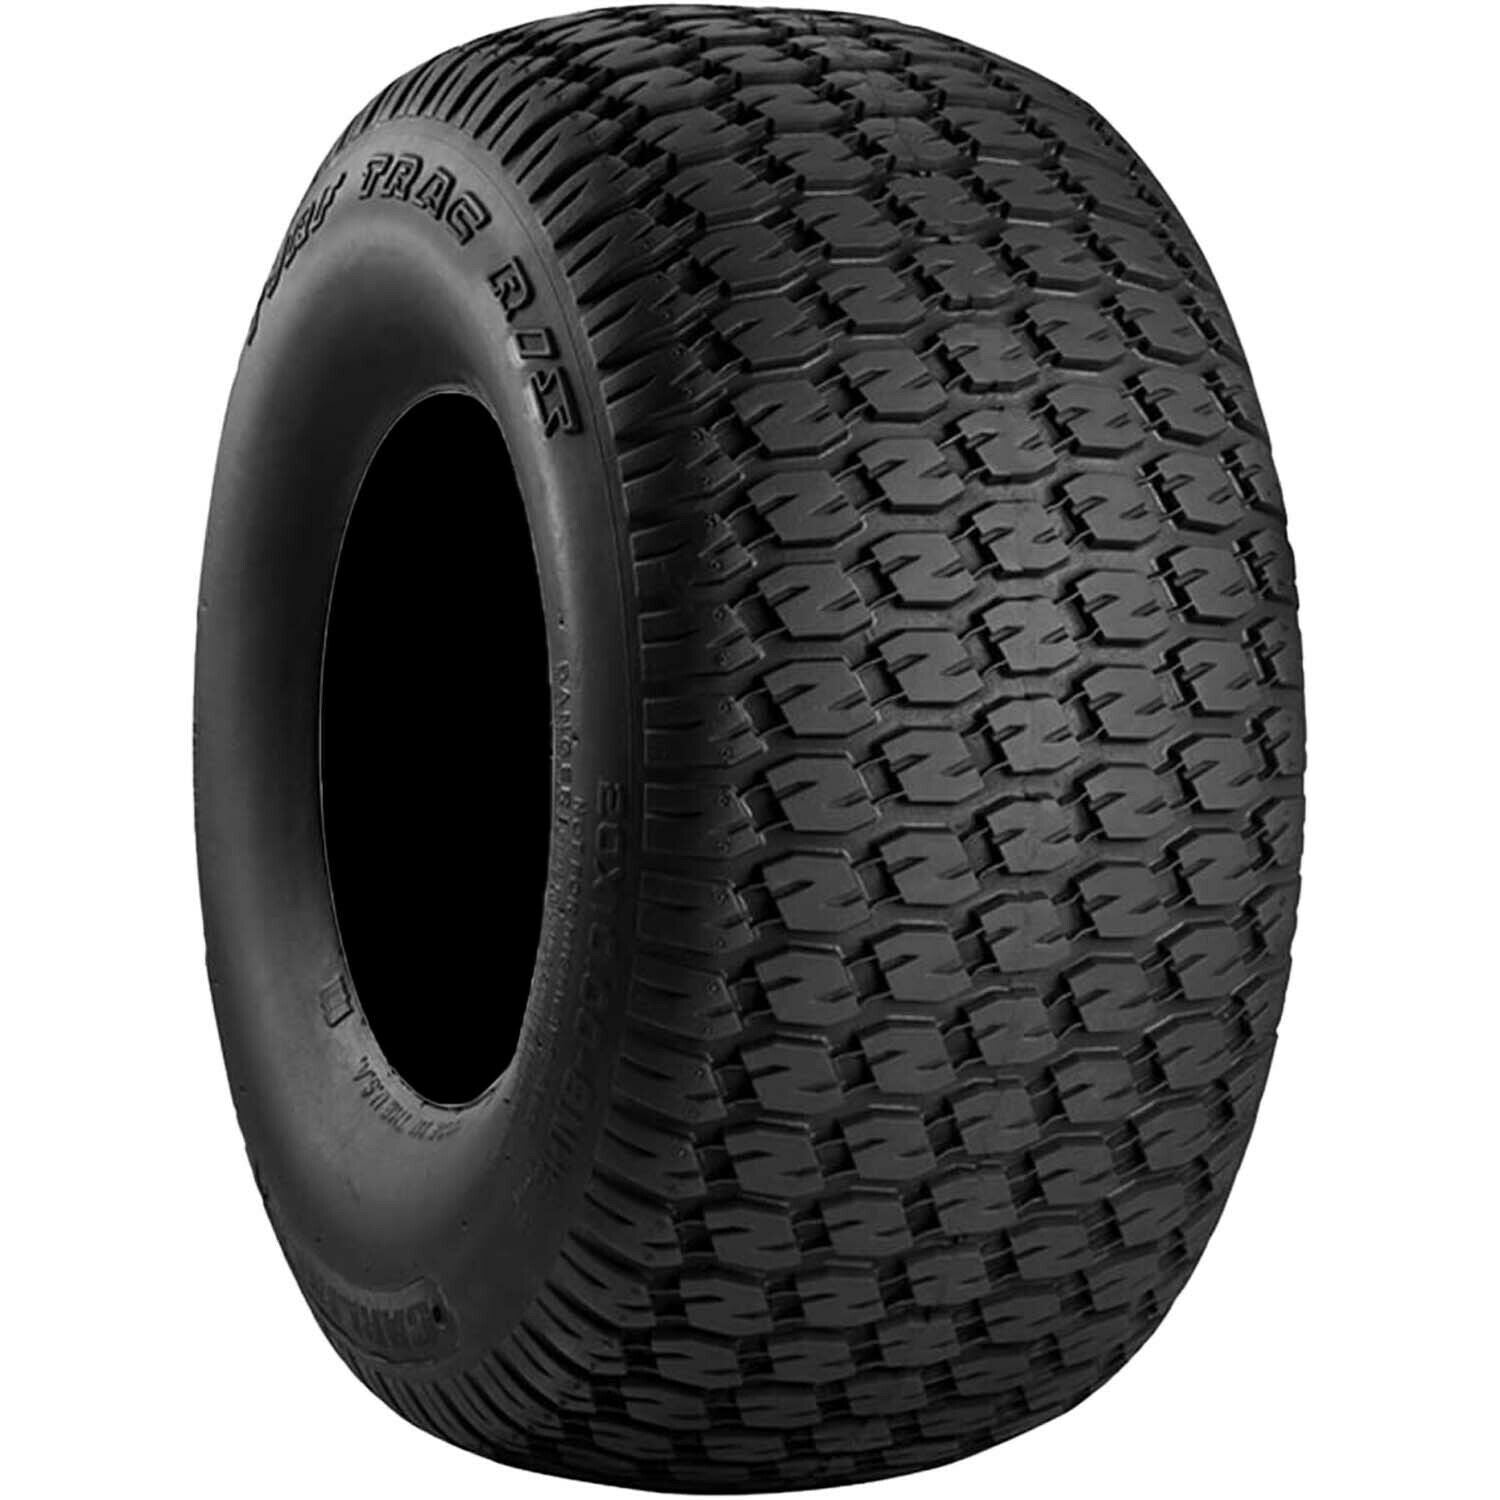 Carlisle Turf Trac R/S Lawn and Garden Tire 4Ply 22.5x10.00-8